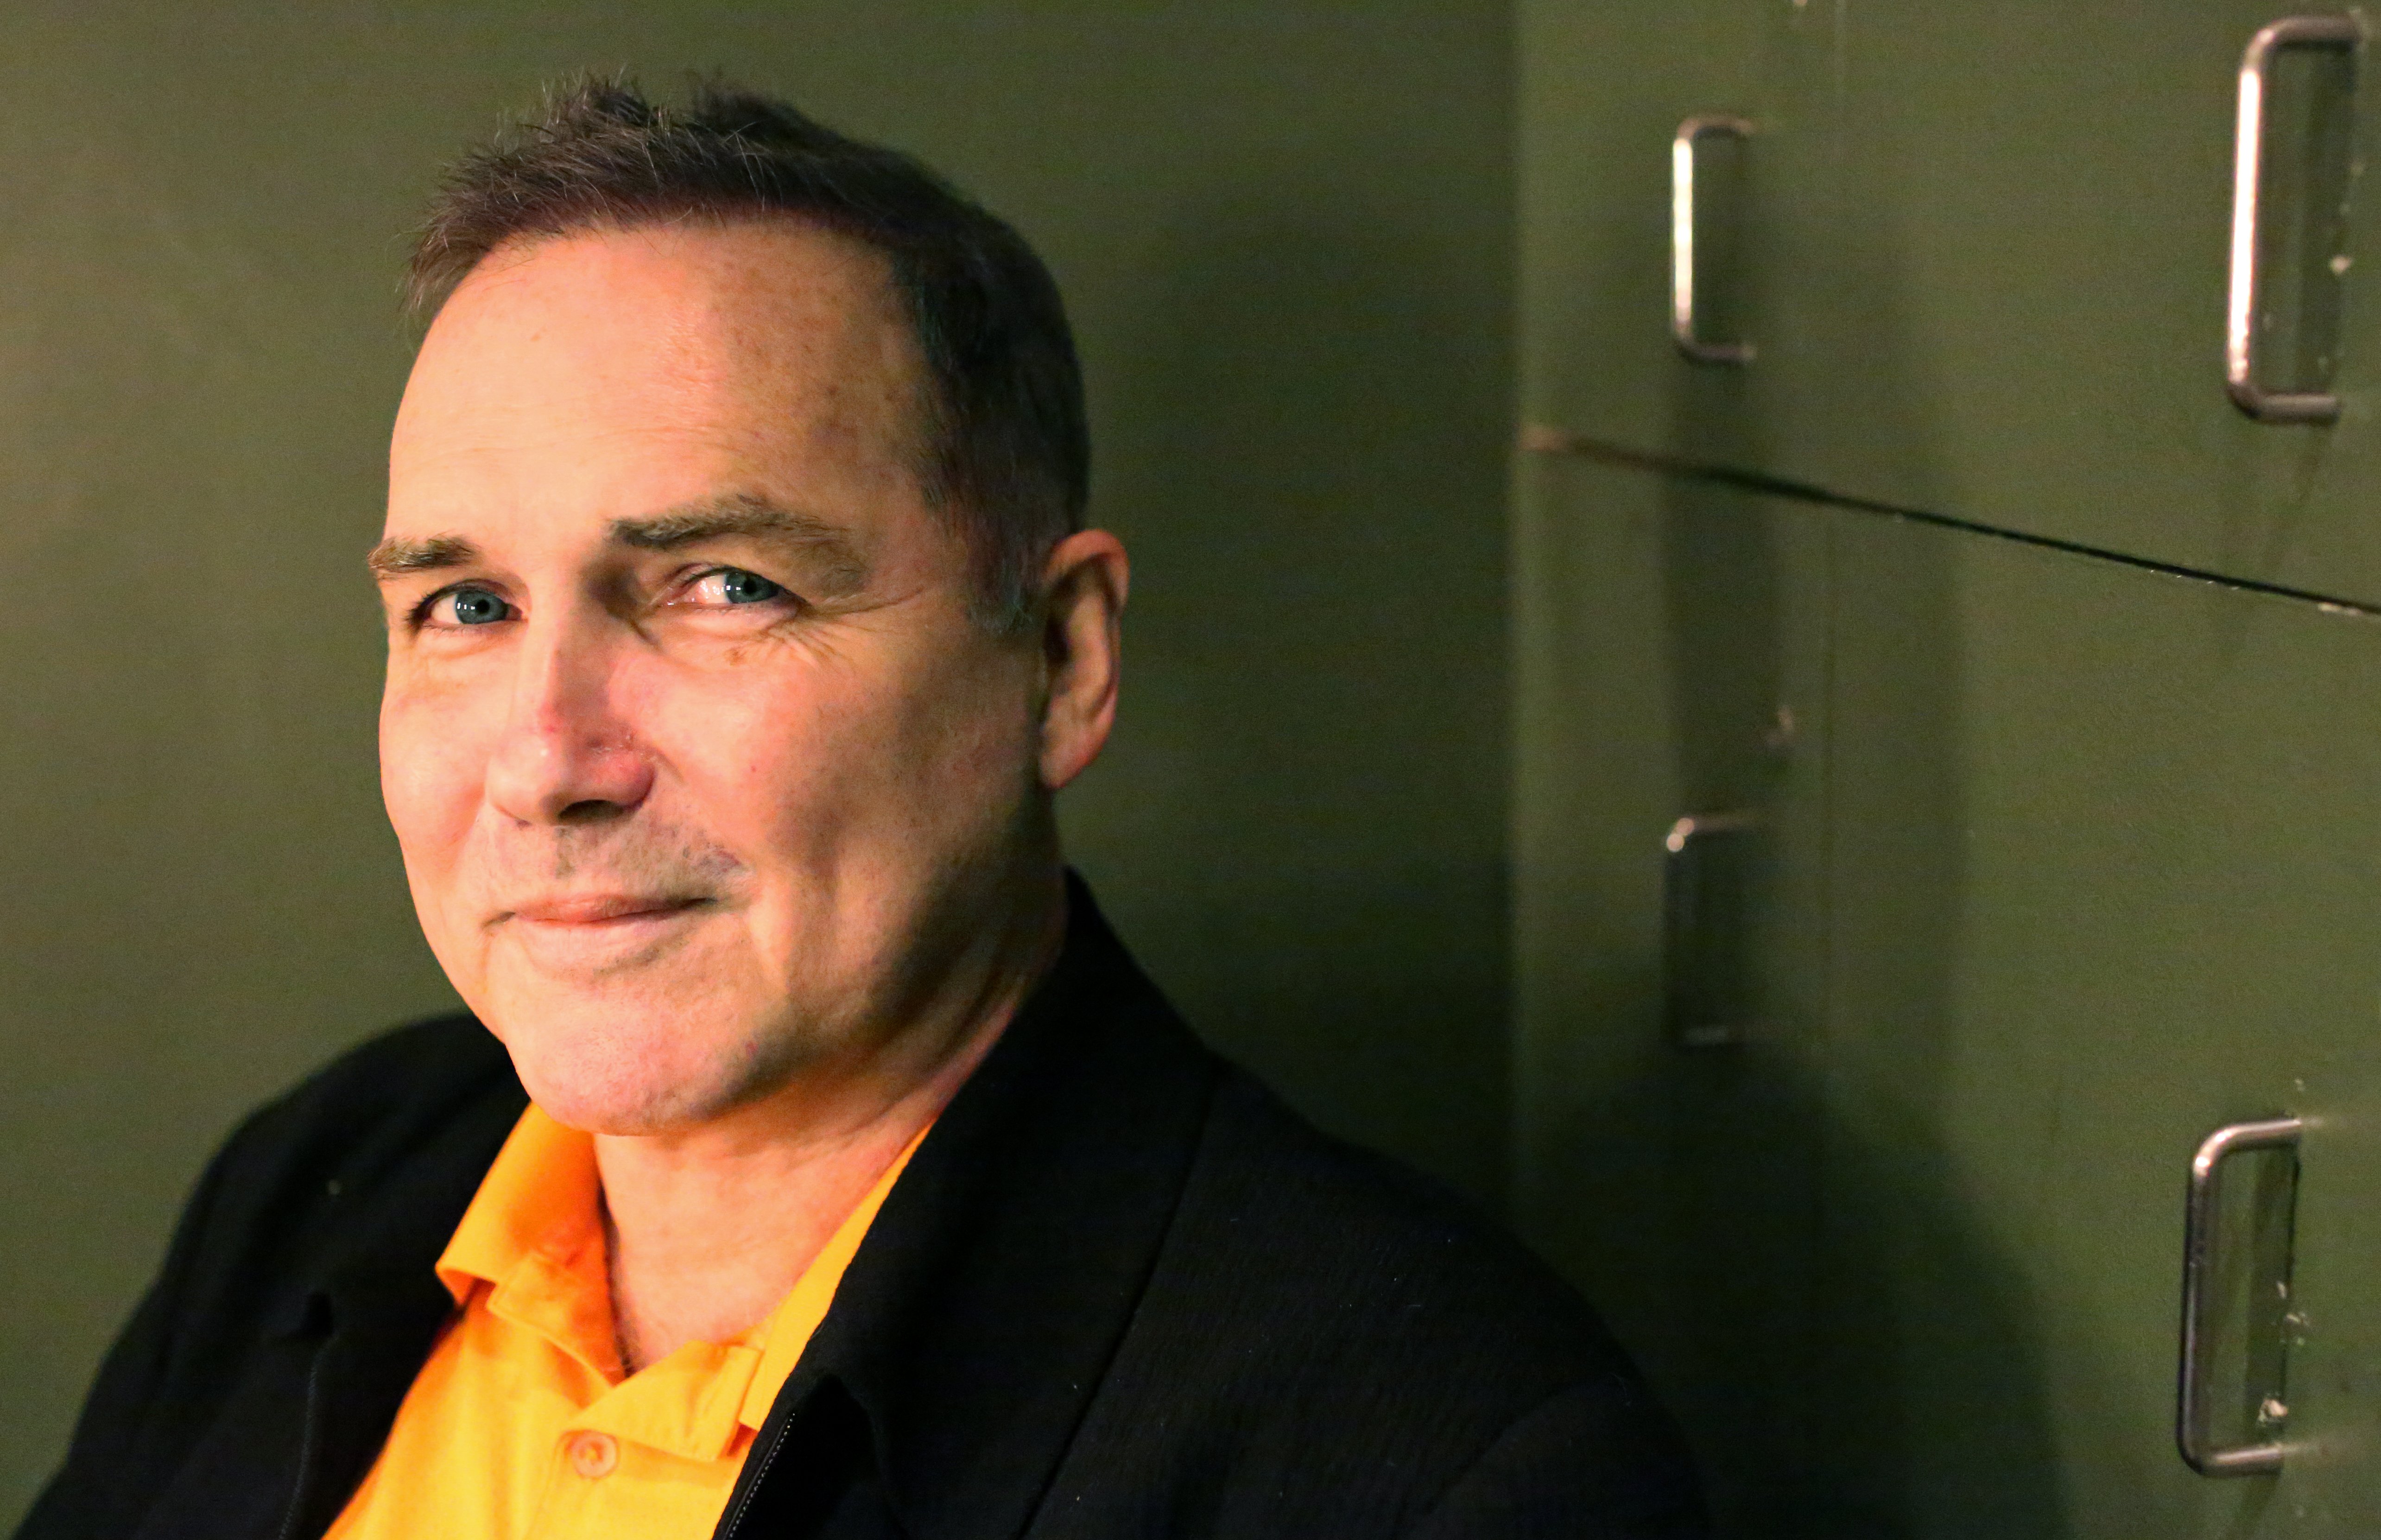 Comedian Norm MacDonald poses for a portrait while preparing to perform at Carolines on Broadway in Manhattan, NY, on November 13, 2015. | Source: Getty Images